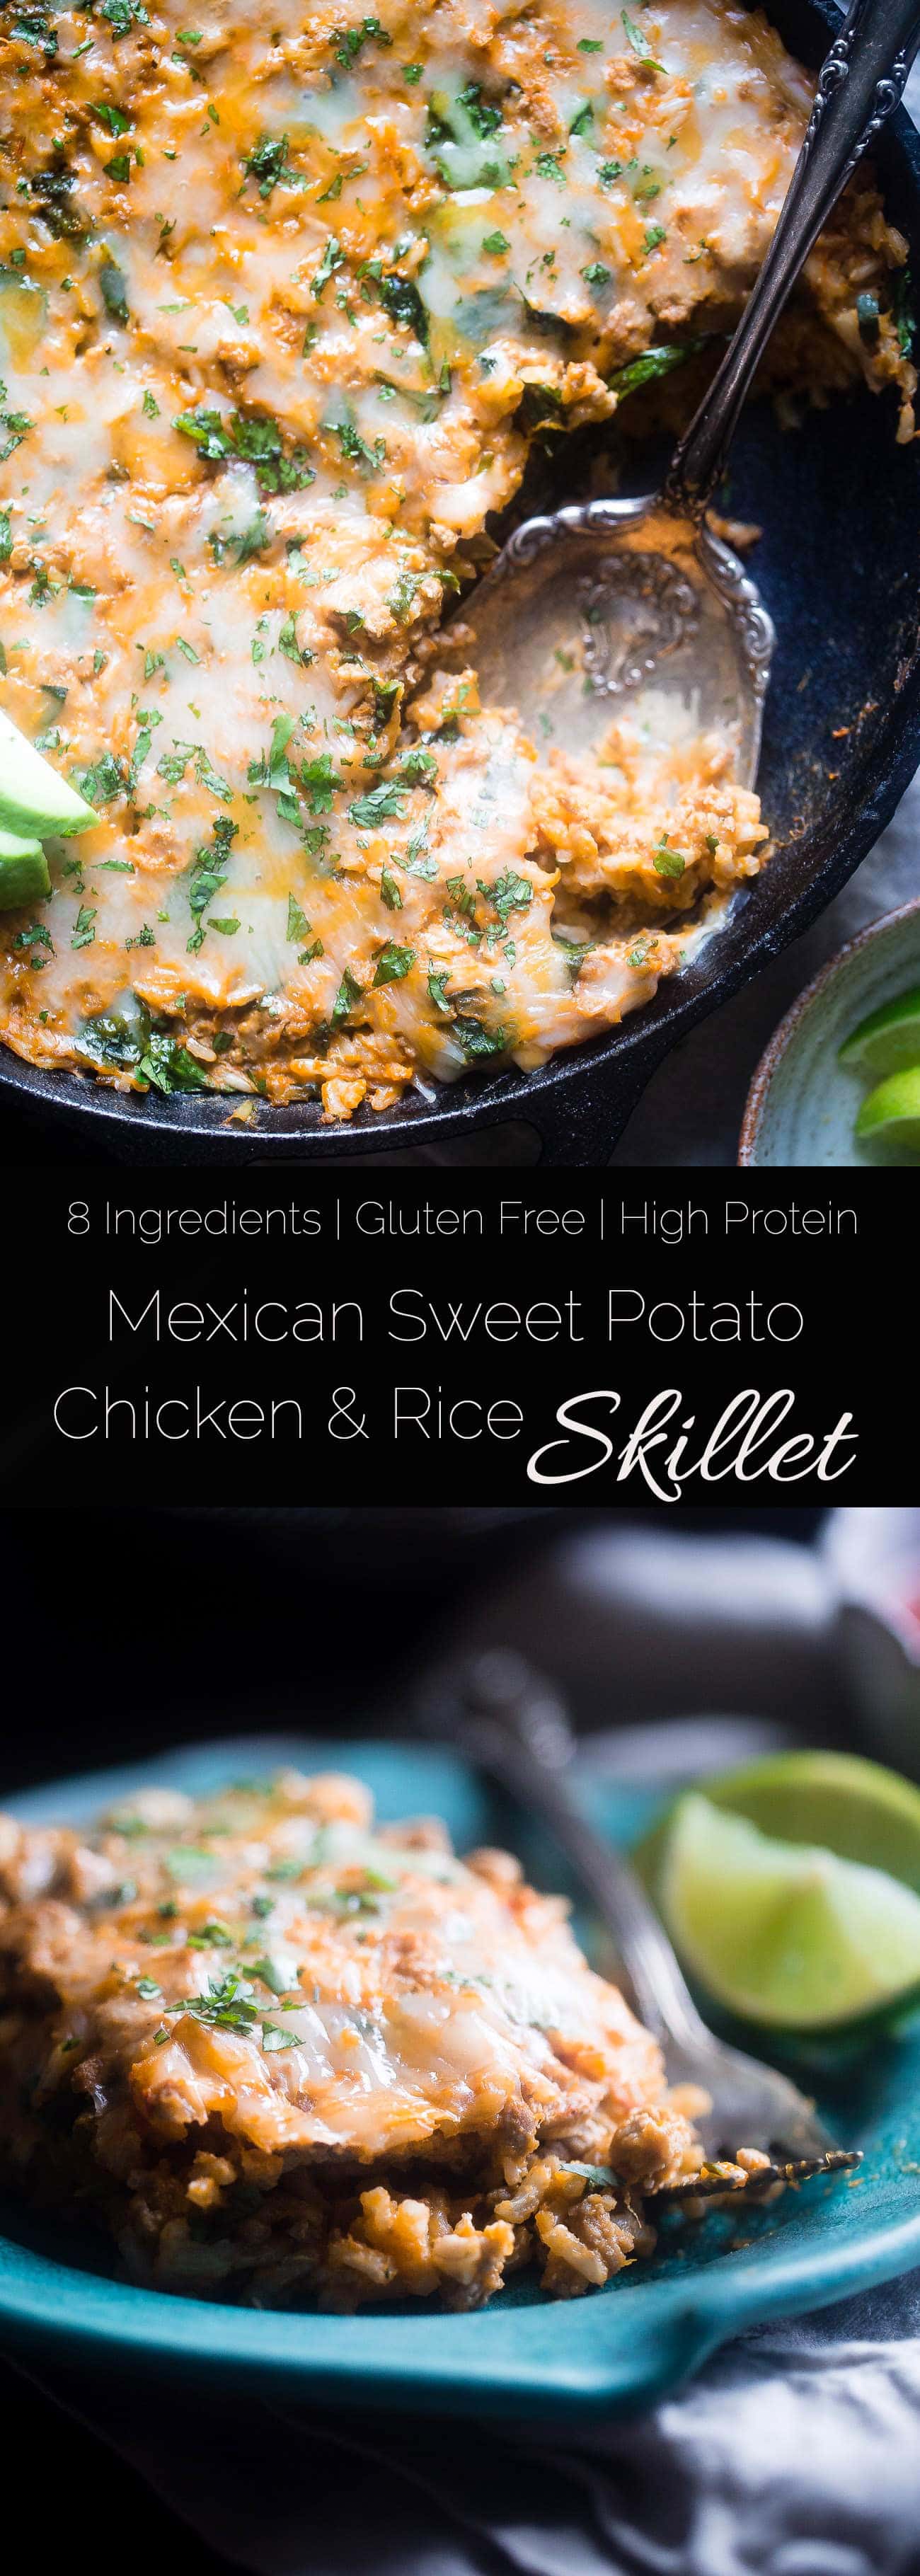 One Pot Mexican Chicken Rice Casserole - This chicken Mexican rice casserole uses sweet potato for extra creaminess! It's a healthy, gluten free, 8 ingredient dinner for busy weeknights that is only 330 calories! | Foodfaithfitness.com | @FoodFaithFit